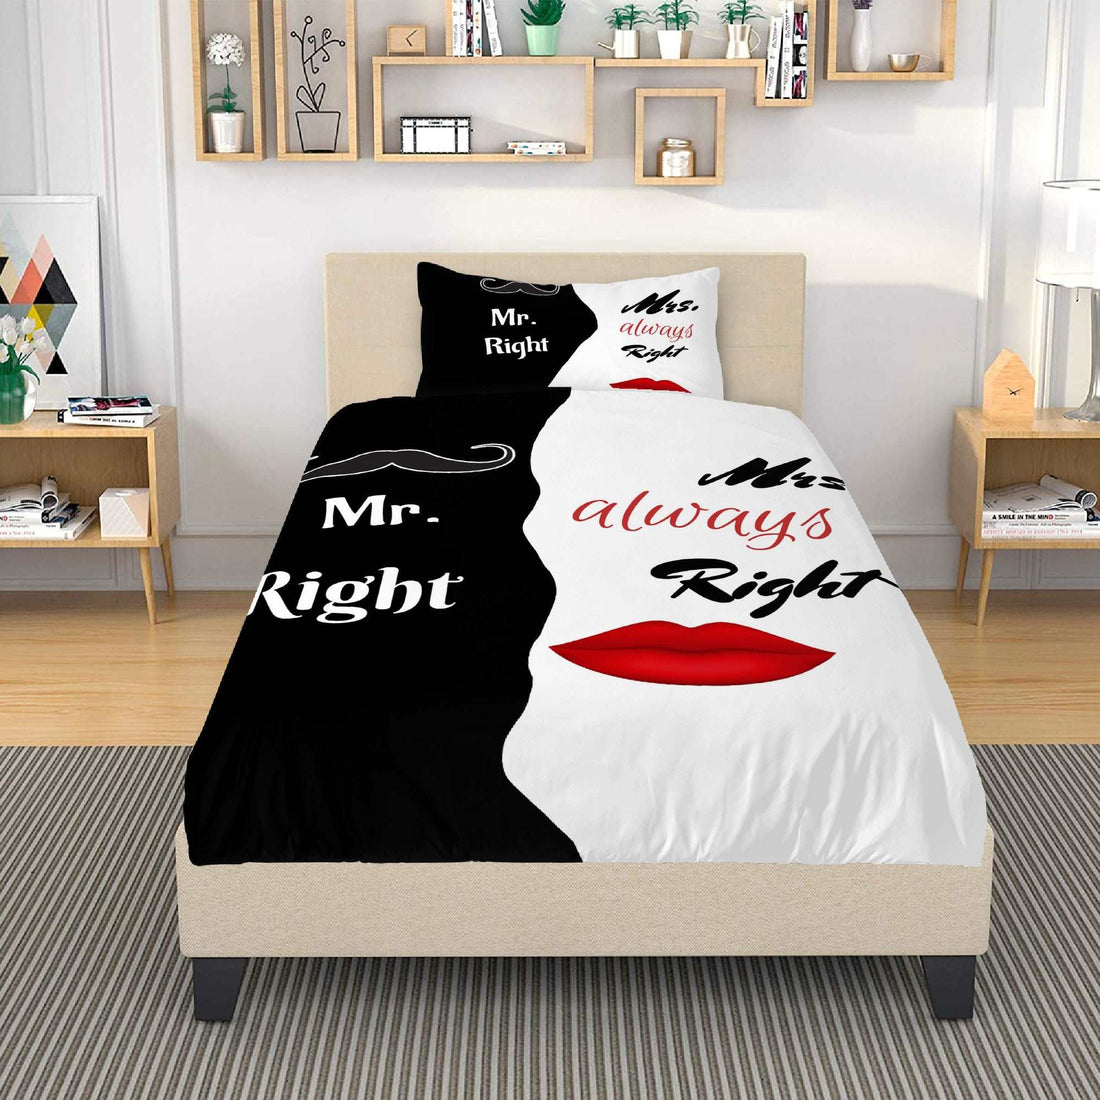 Bedding Mr.Right and Mrs.always Right Home-clothes-jewelry